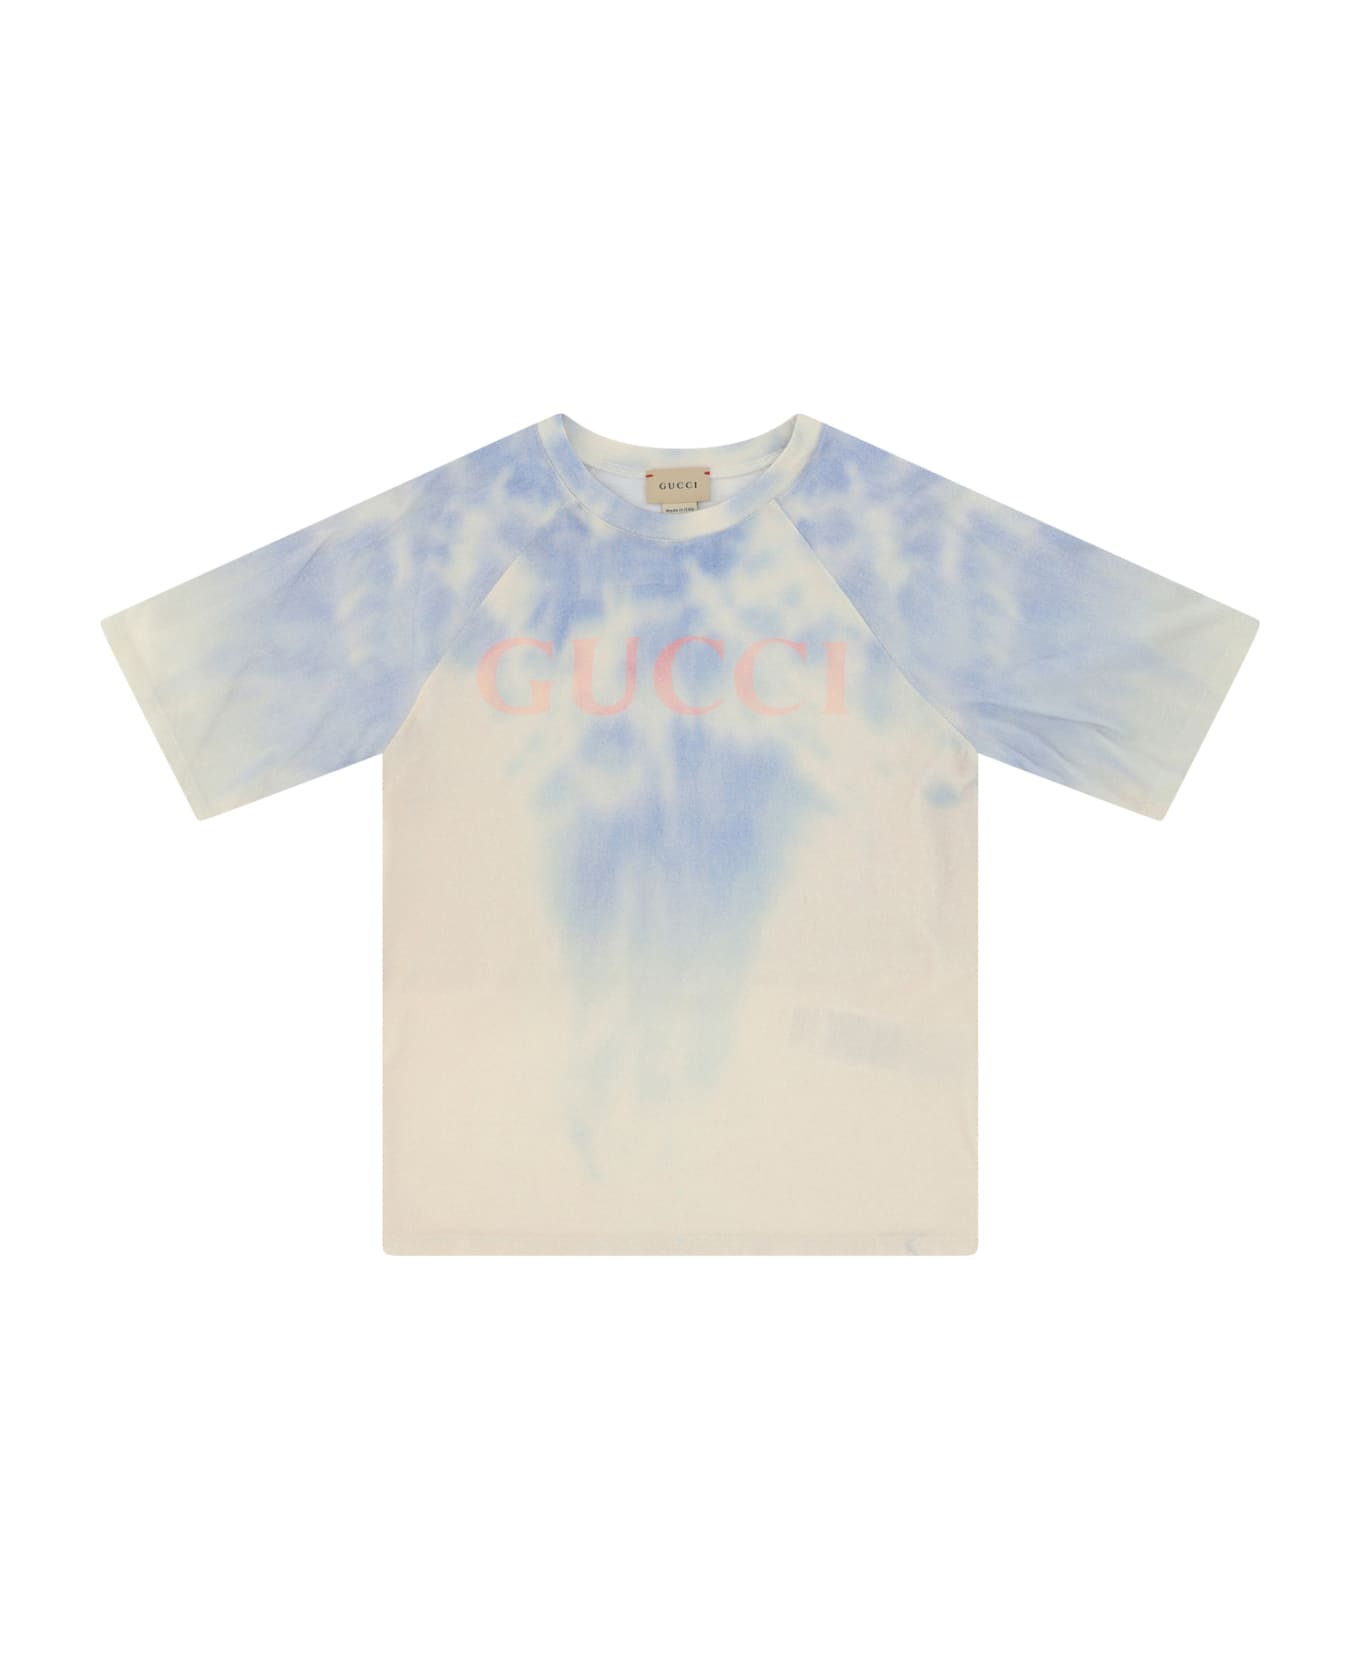 Gucci MARMONT T-shirt For Boy - WHITE